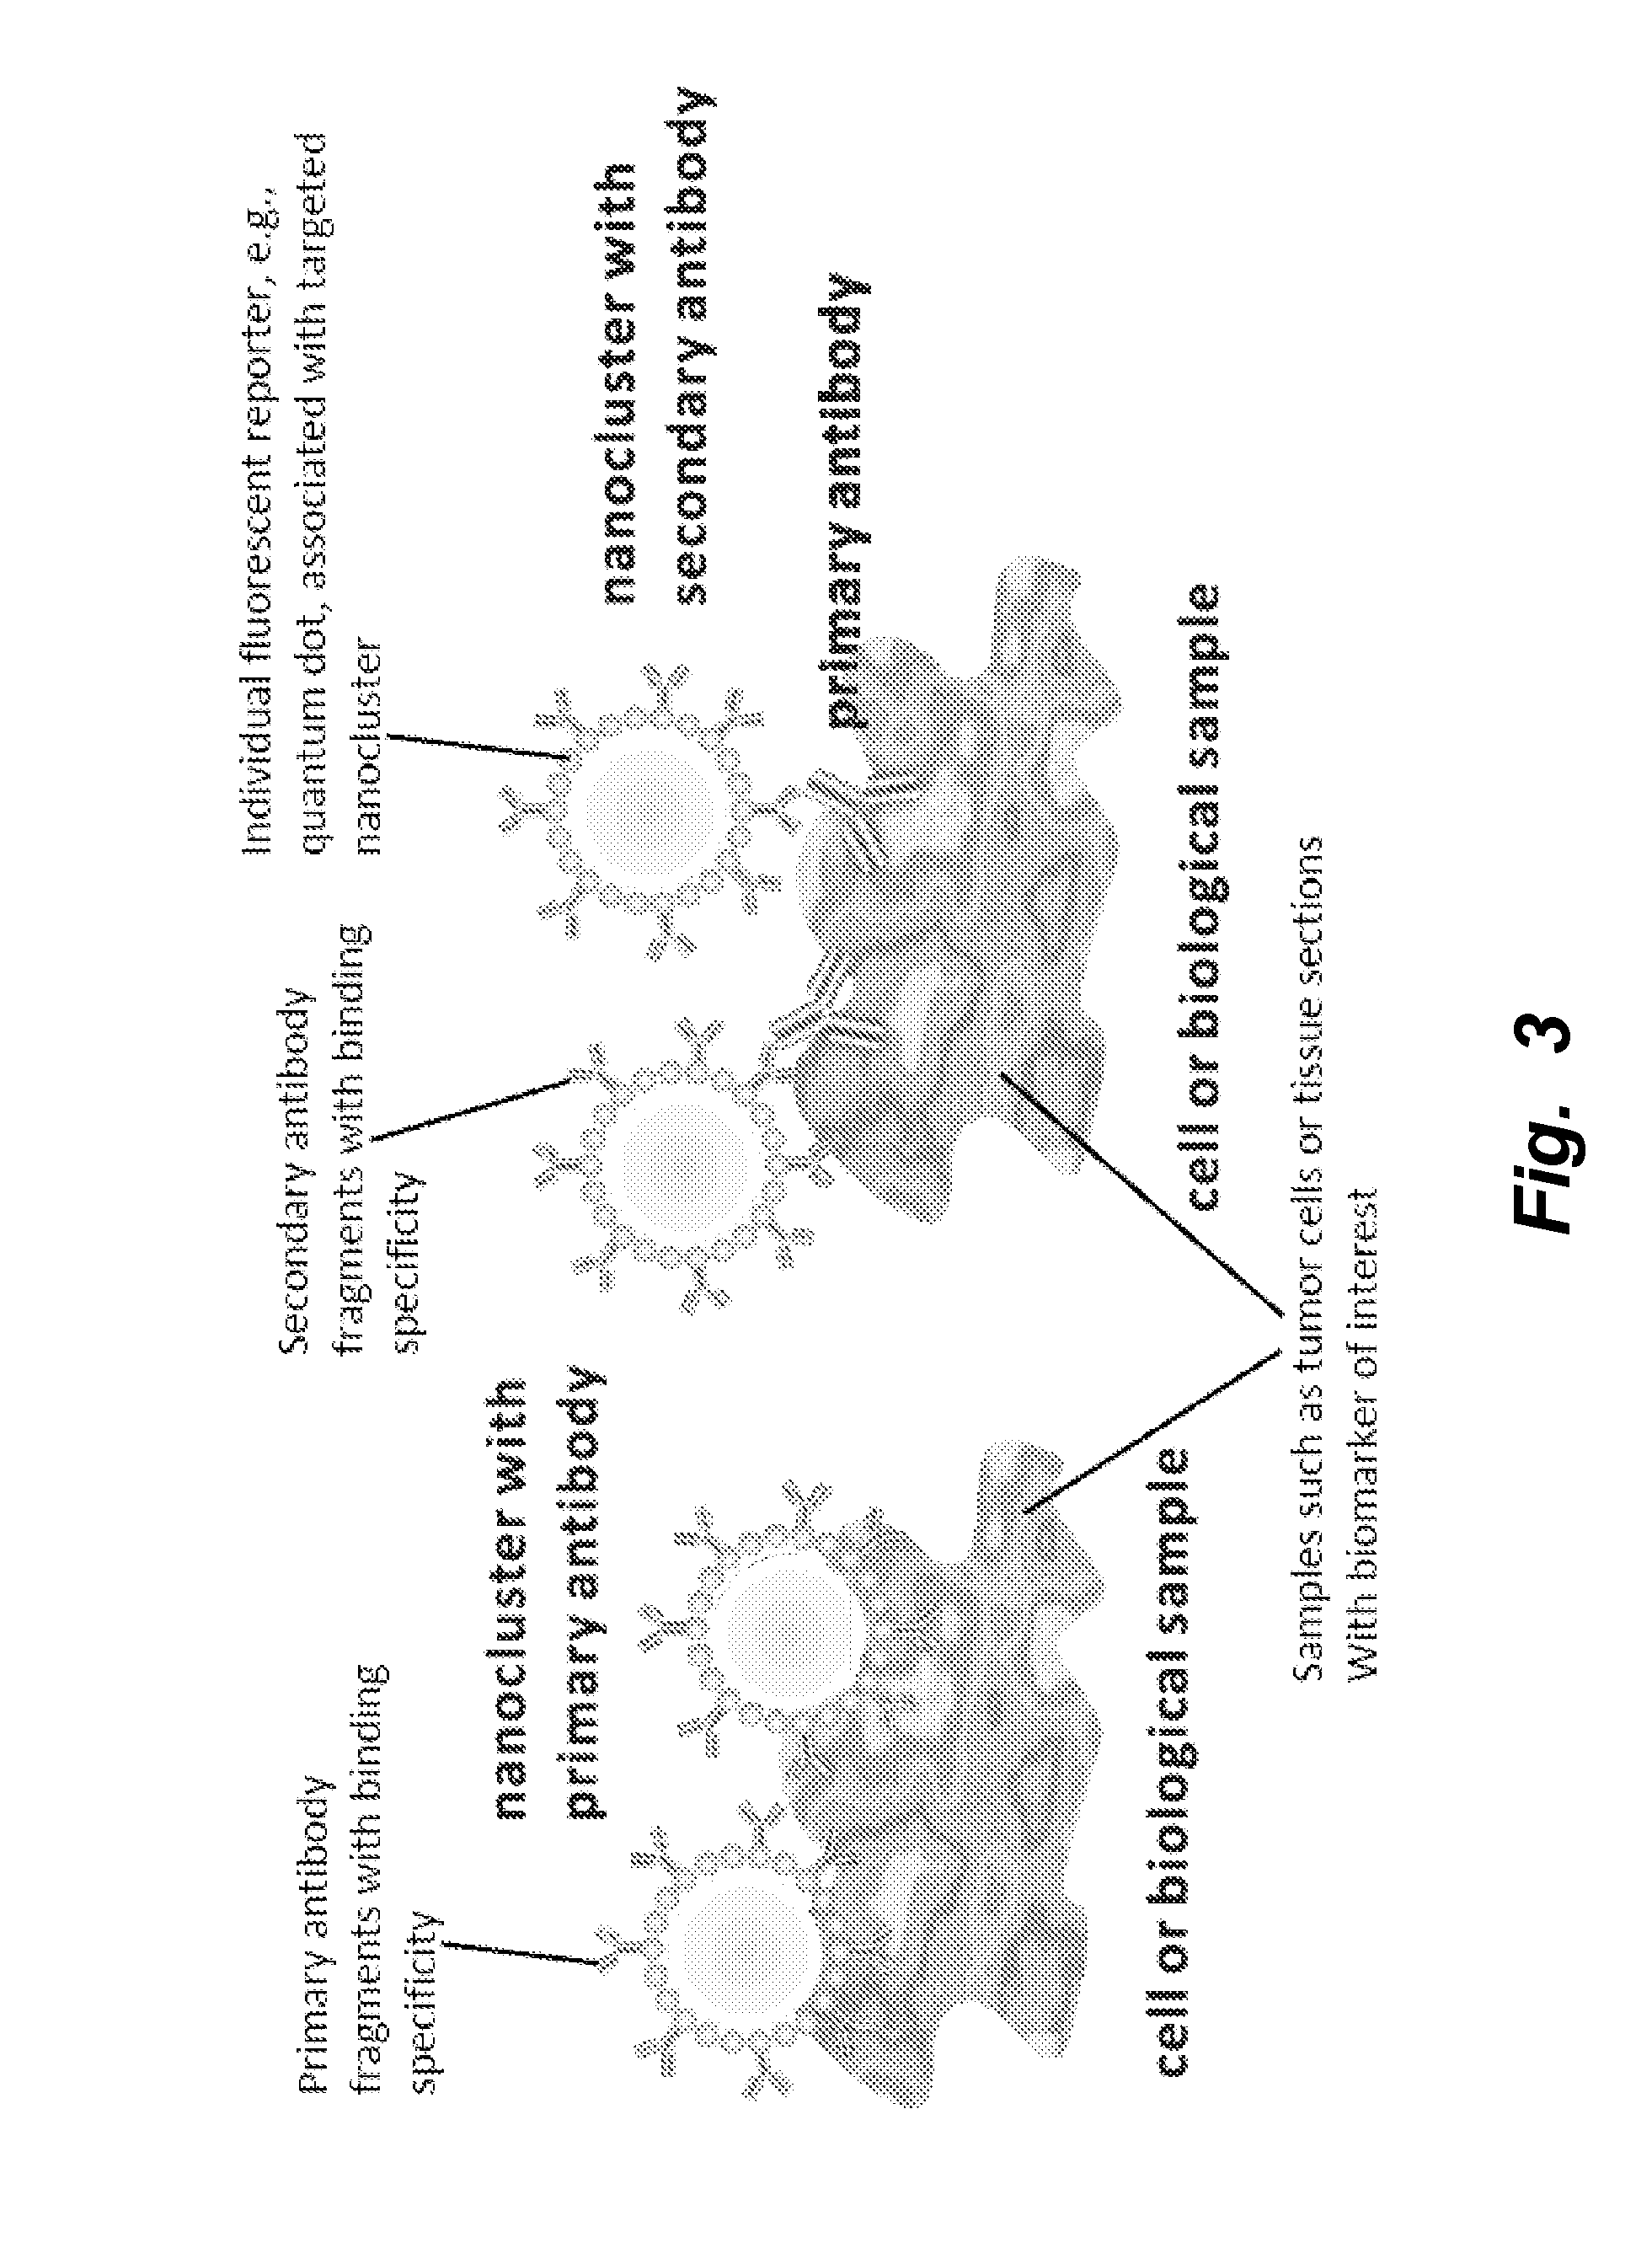 Targeted nanoclusters and methods of their use